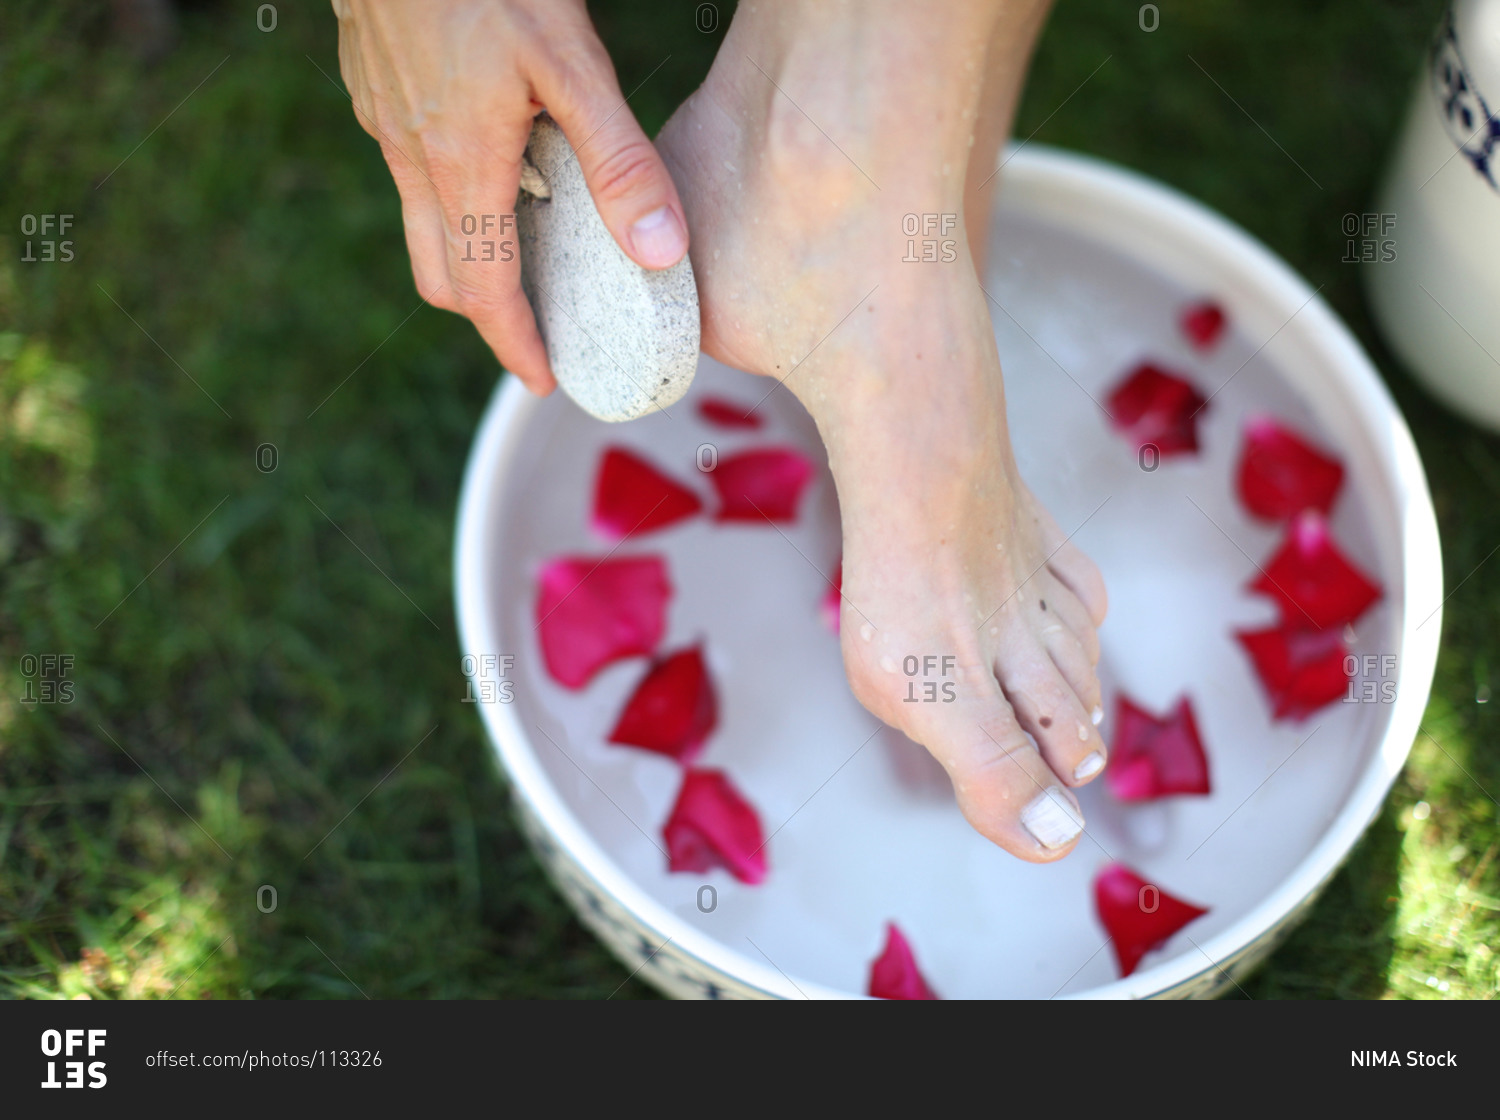 Woman taking an outdoor foot bath with rose leaves while exfoliating cracked skin on heel with pumice stone